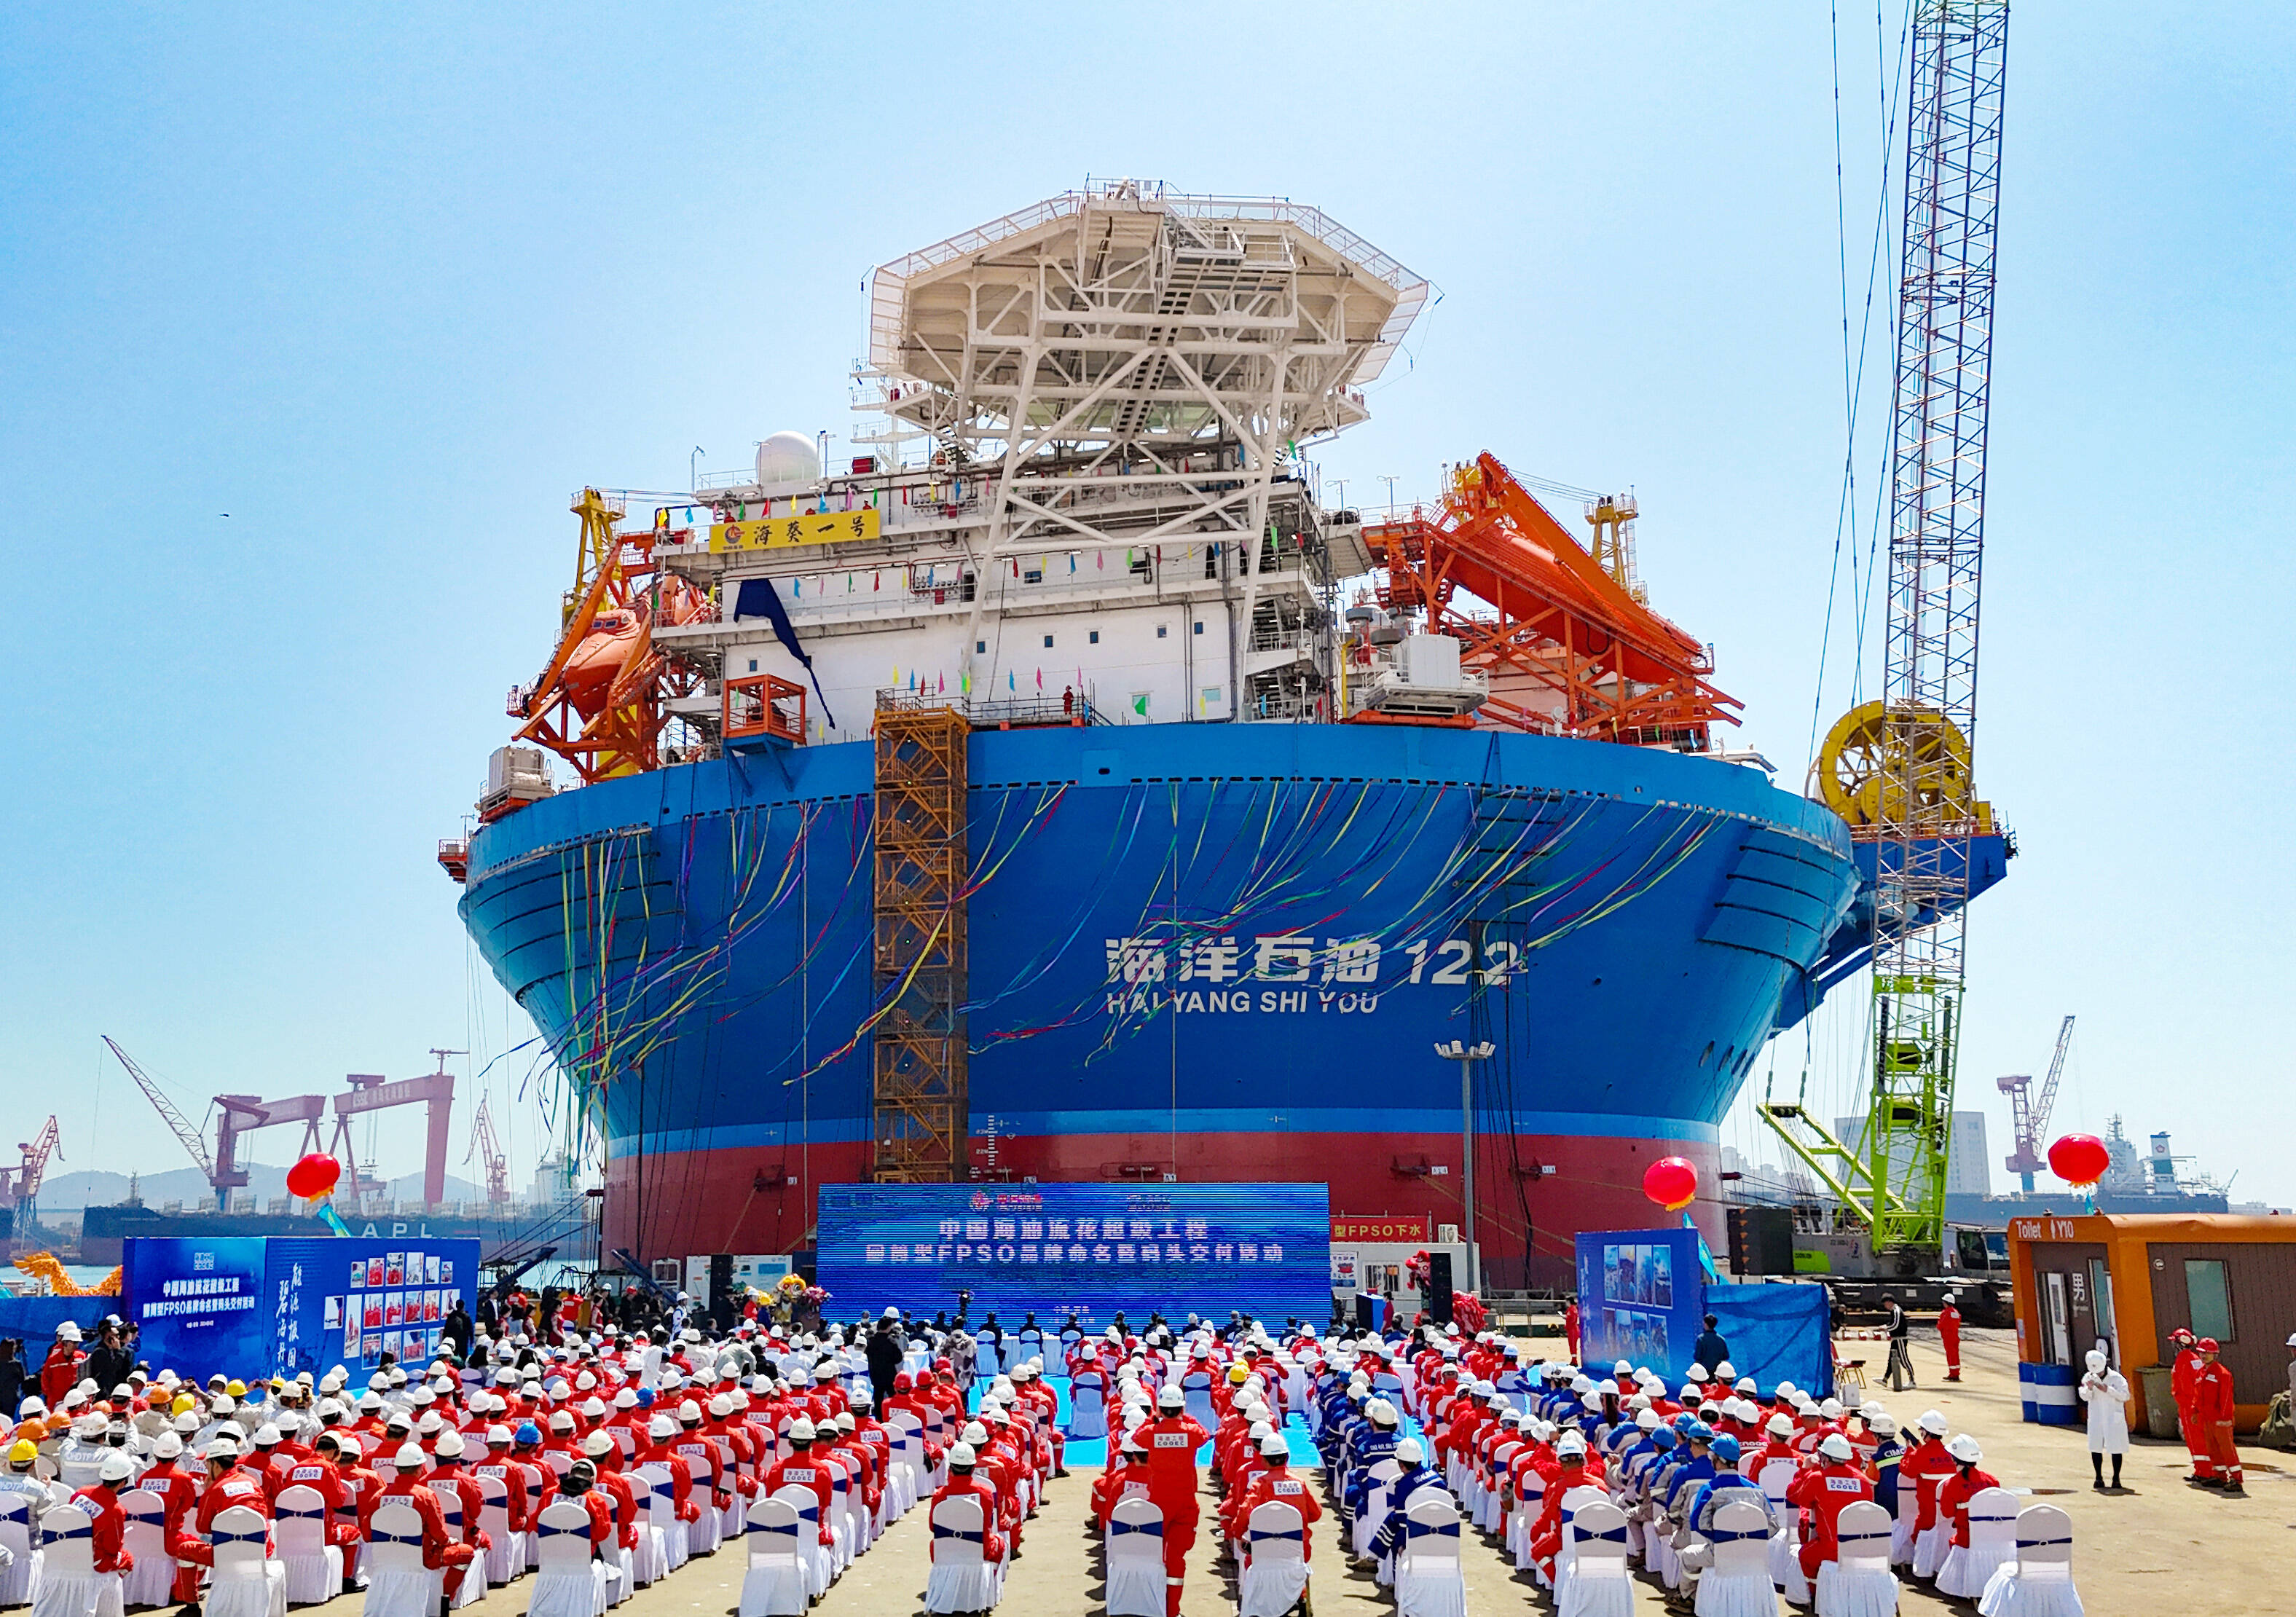  Asia's first cylindrical "offshore oil and gas processing plant" was completed and delivered in Qingdao